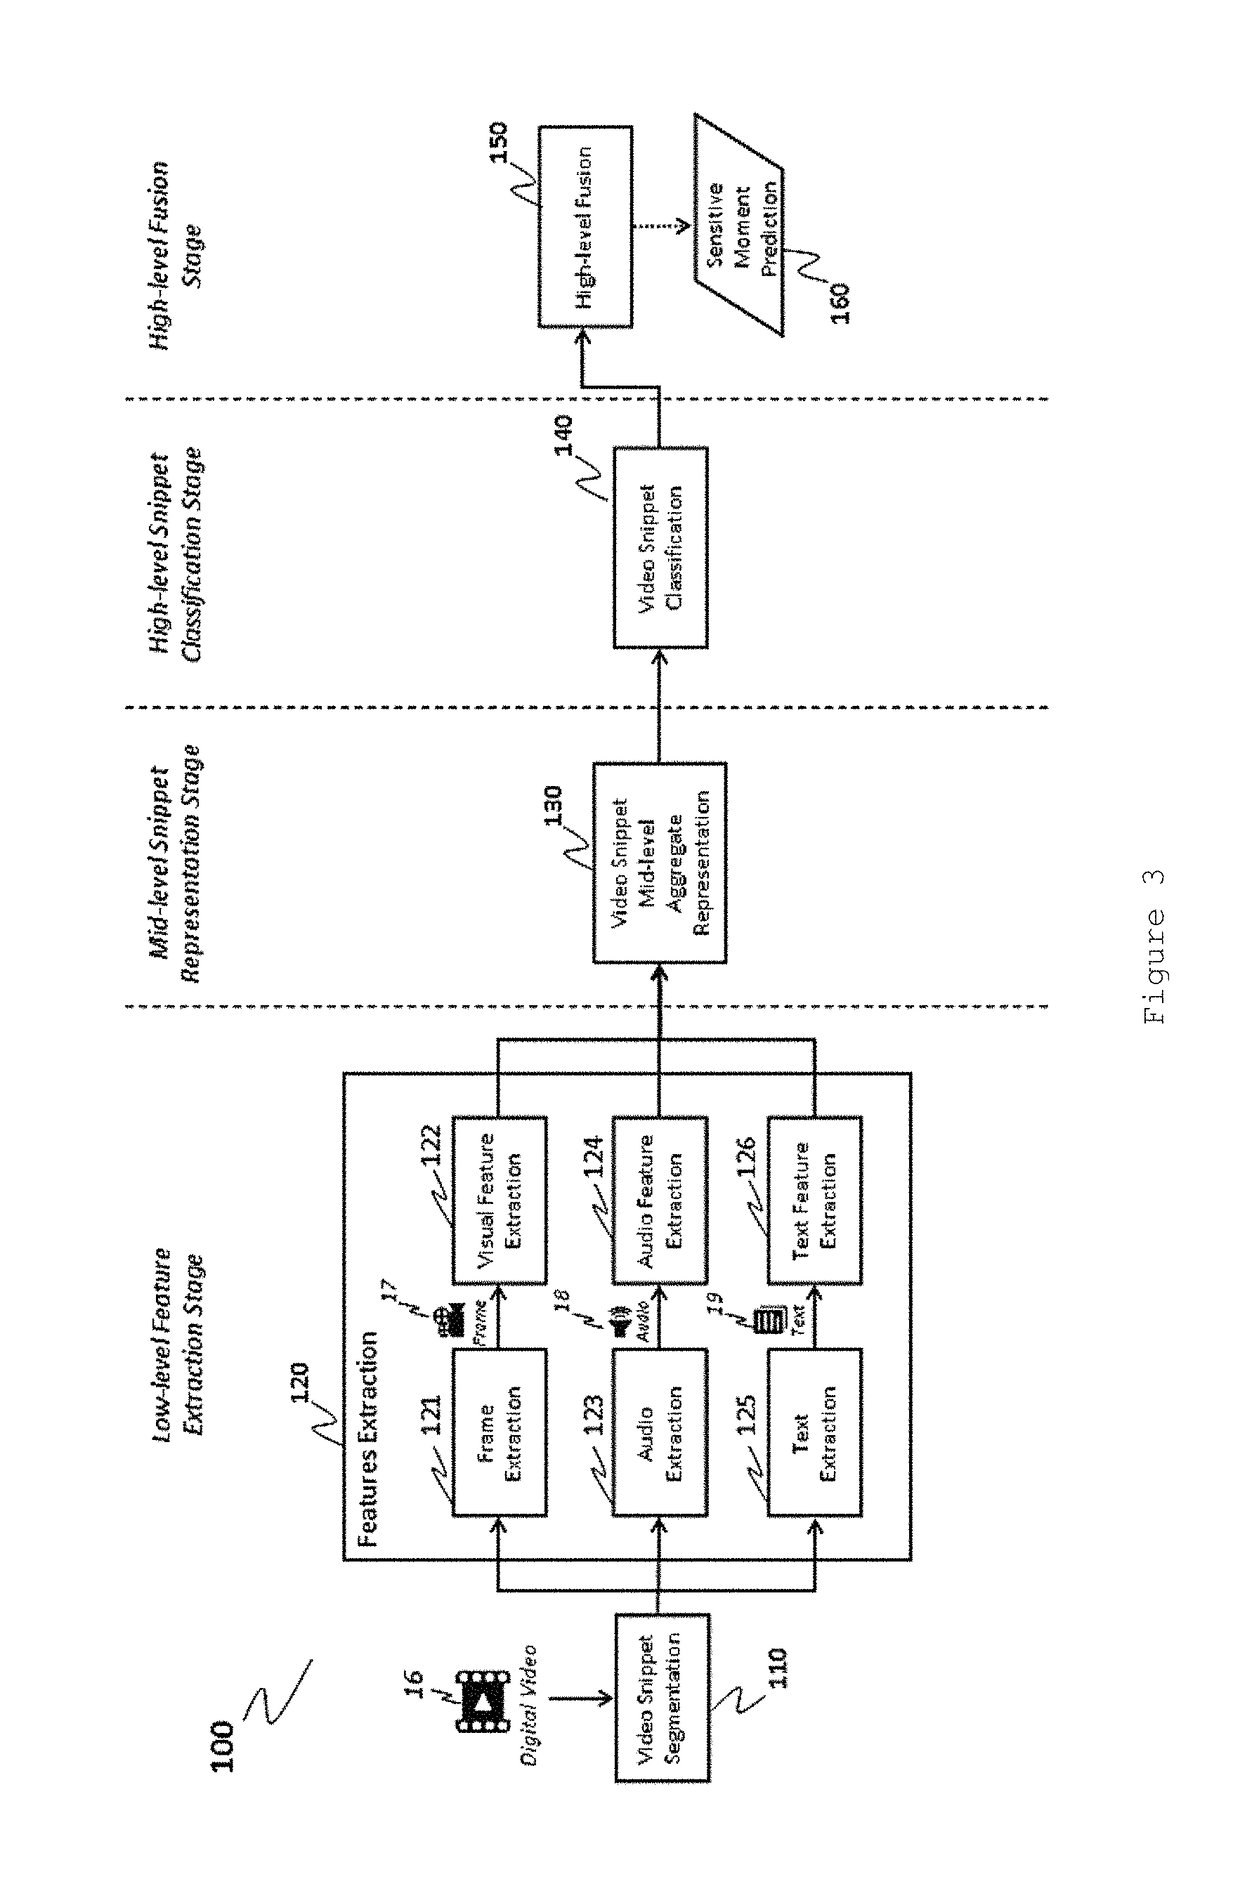 Multimodal and real-time method for filtering sensitive media